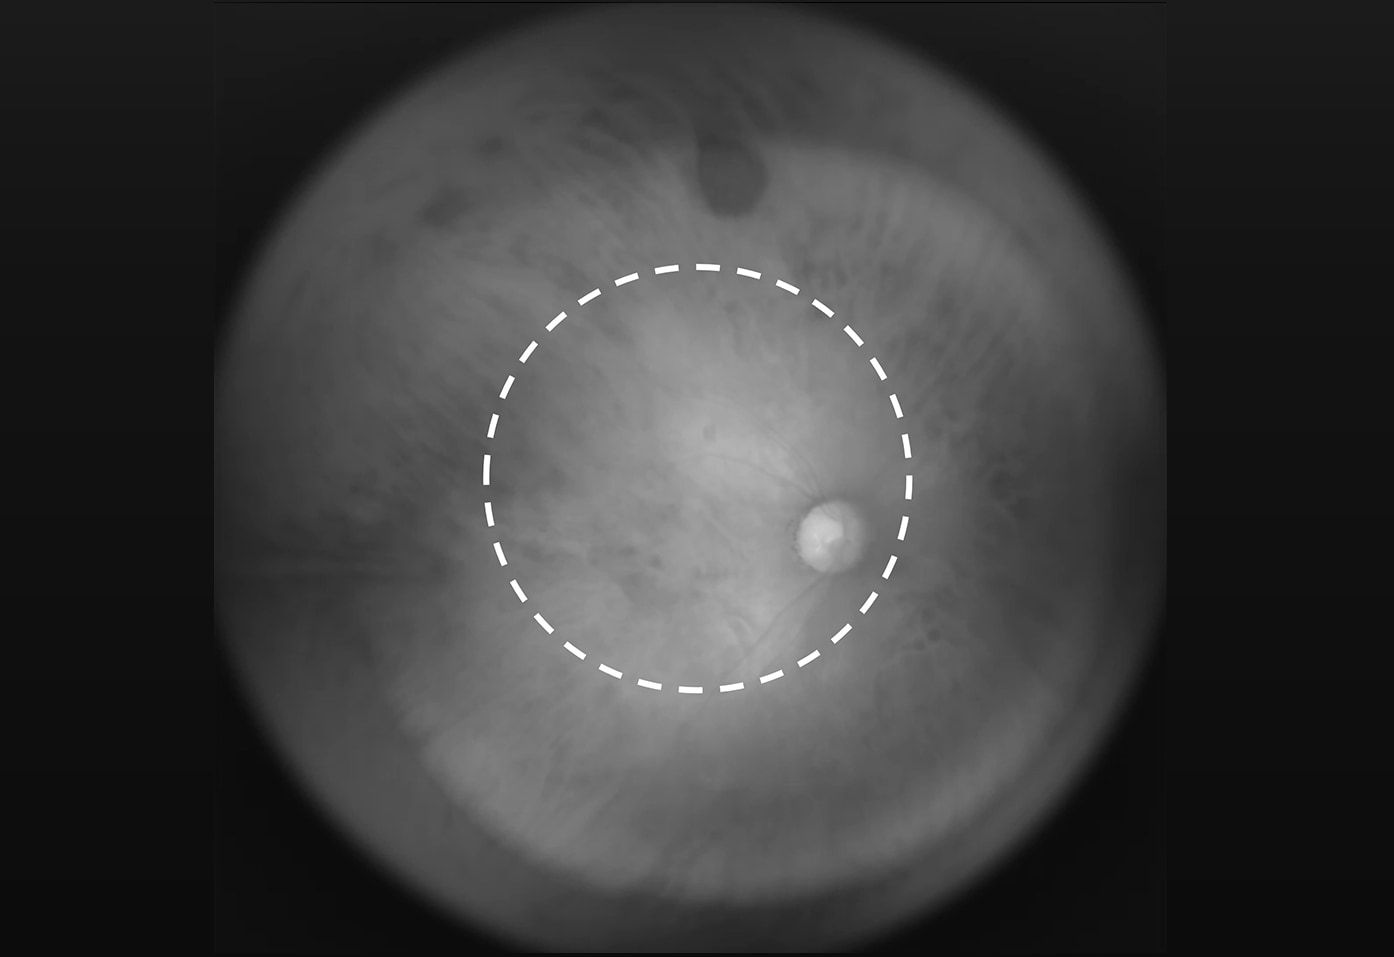 Wide angle fundus image by Near-infrared